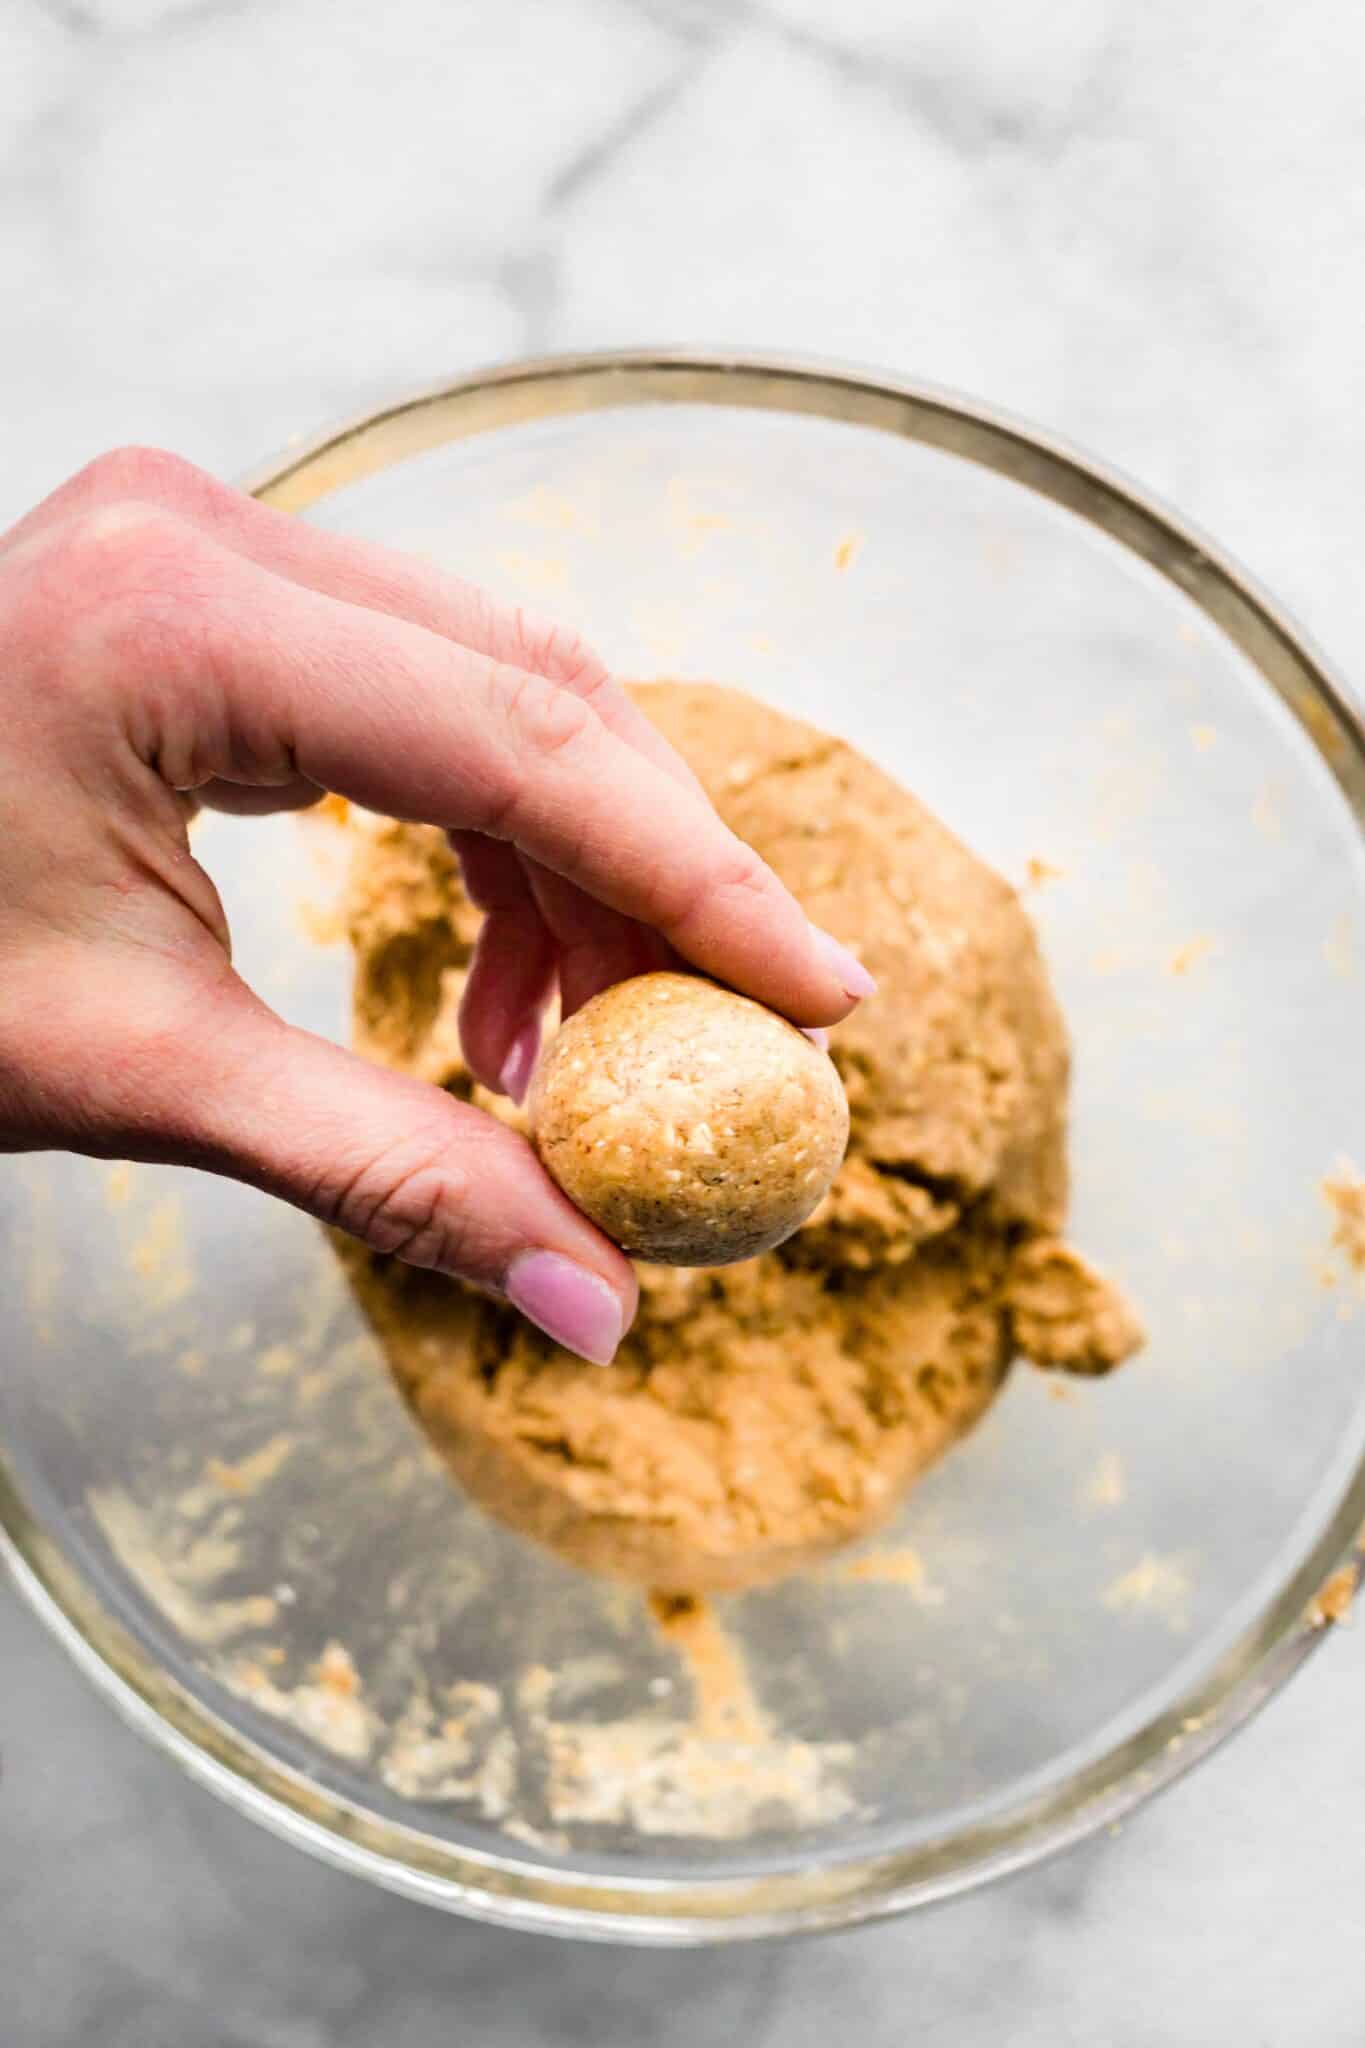 A woman's fingers holding a cinnamon protein breakfast ball.